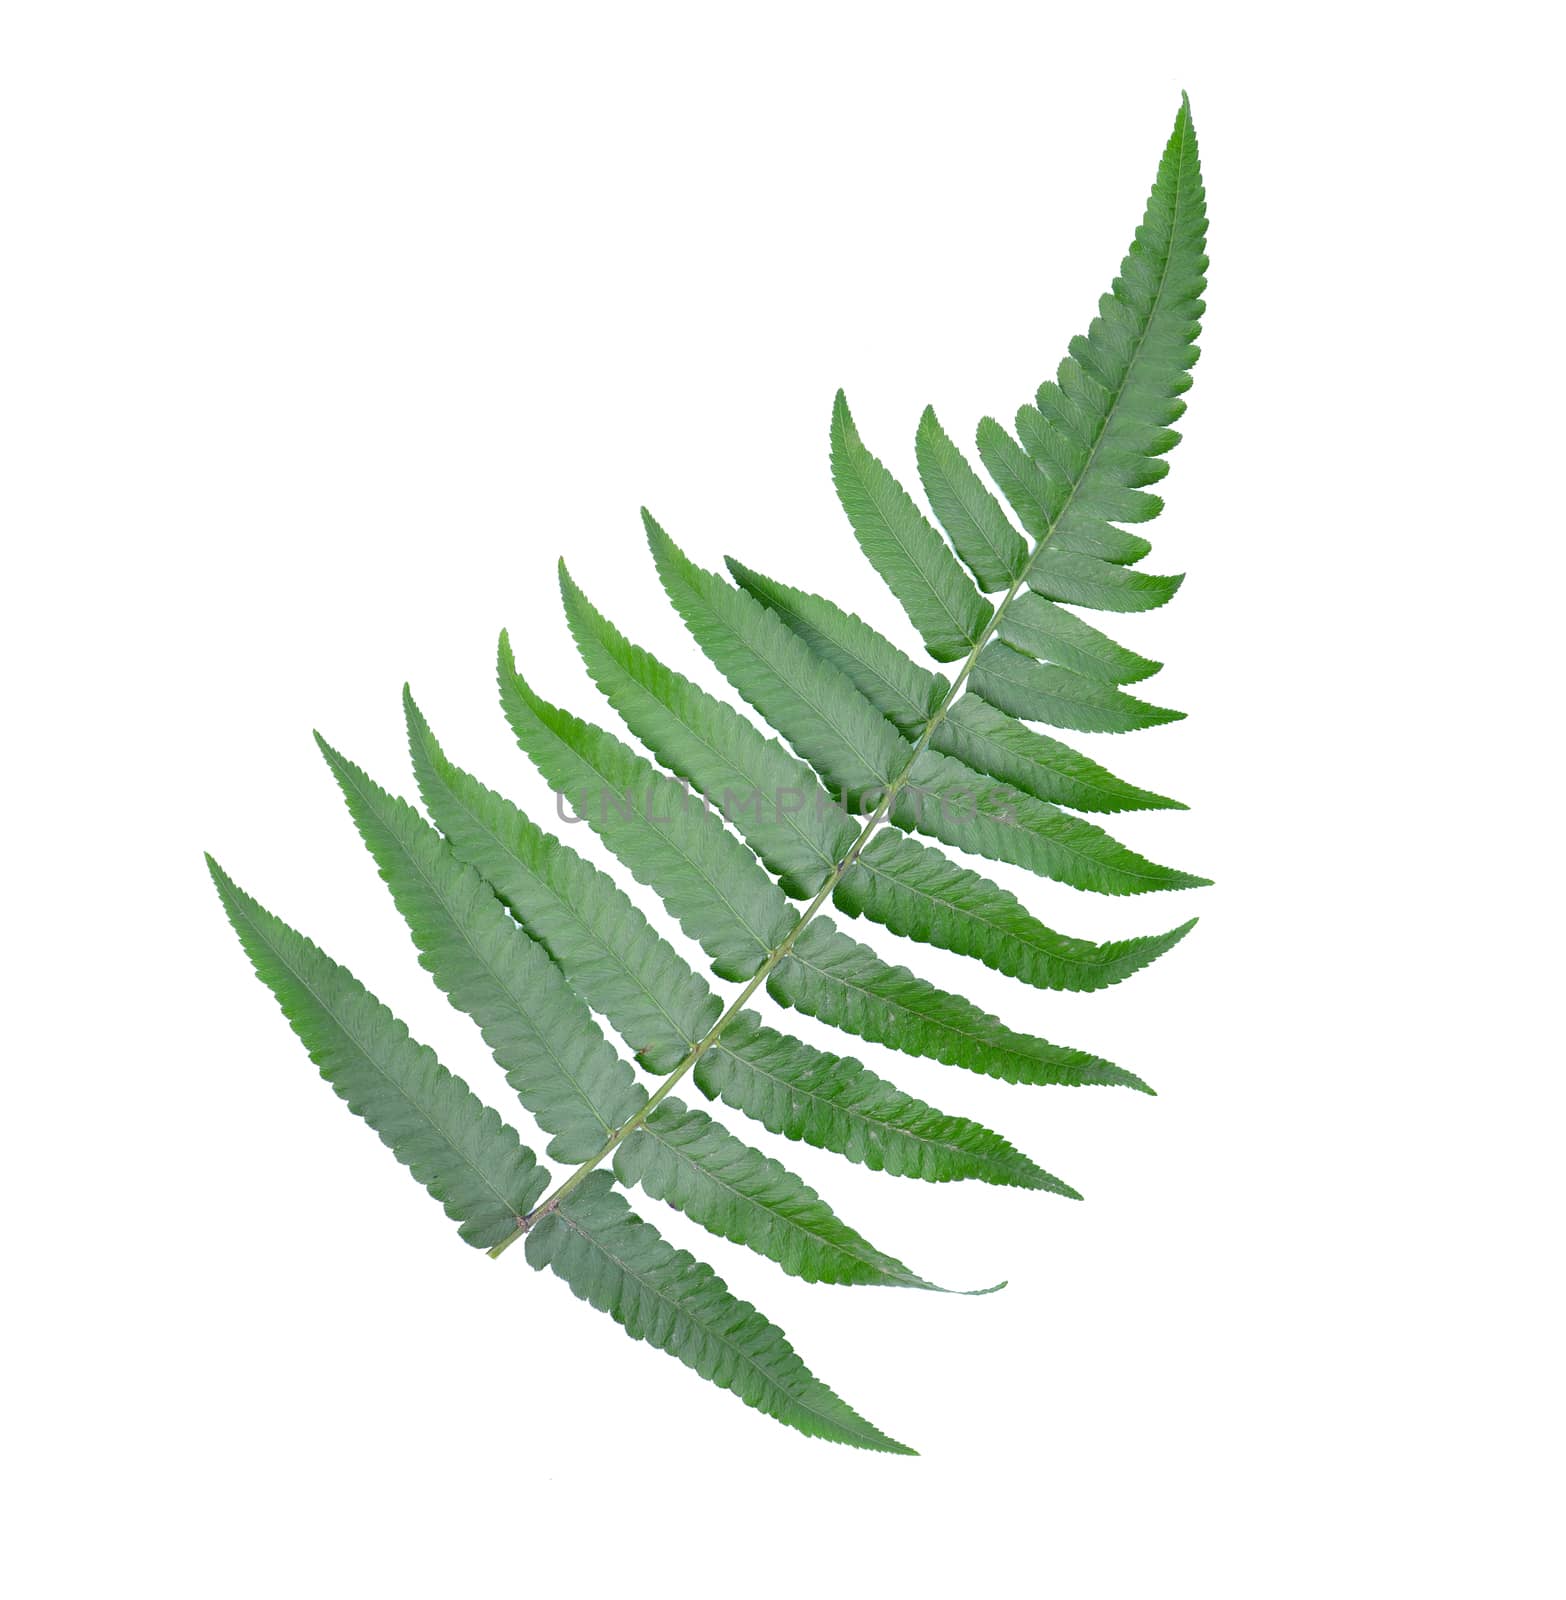 Fern leaf isolated on white background by sommai